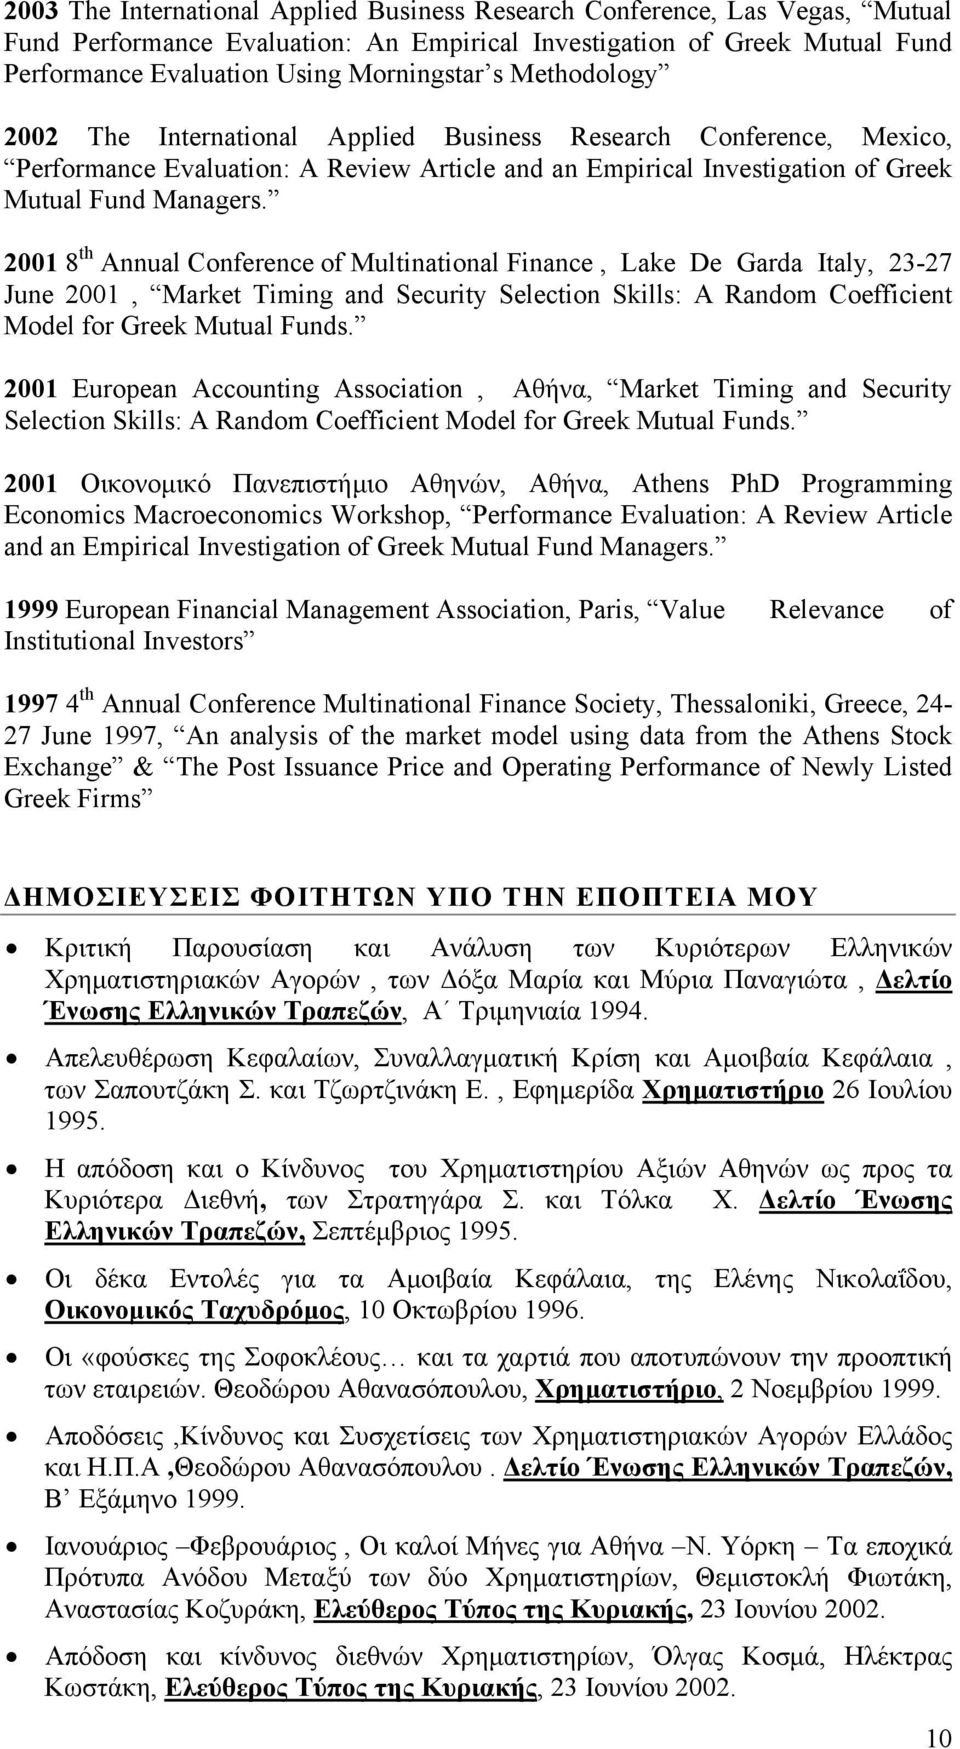 2001 8 th Annual Conference of Multinational Finance, Lake De Garda Italy, 23-27 June 2001, Market Timing and Security Selection Skills: A Random Coefficient Model for Greek Mutual Funds.